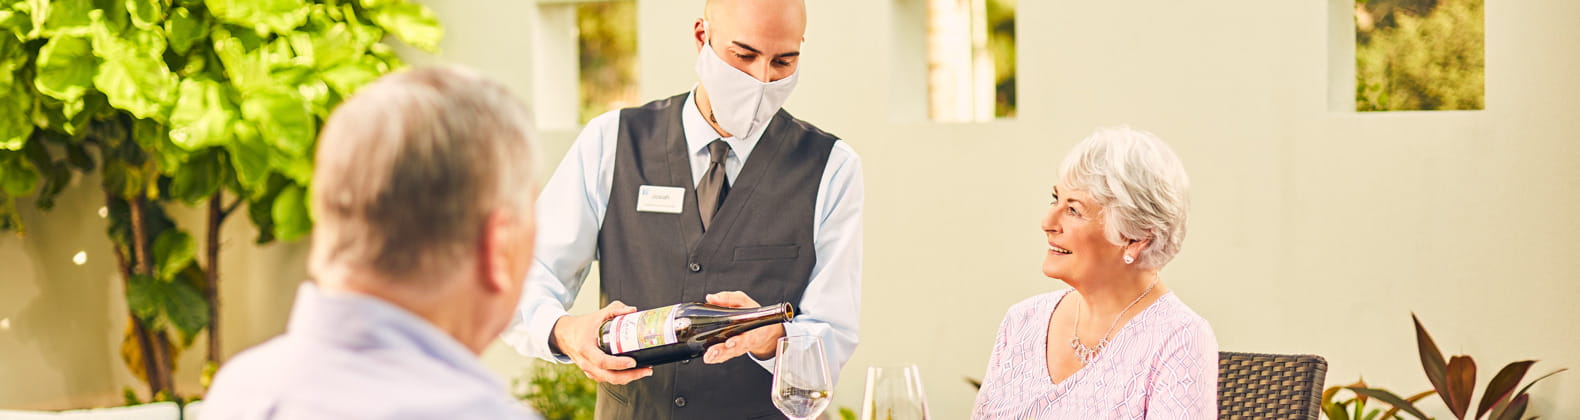 A server wearing a mask pours wine.